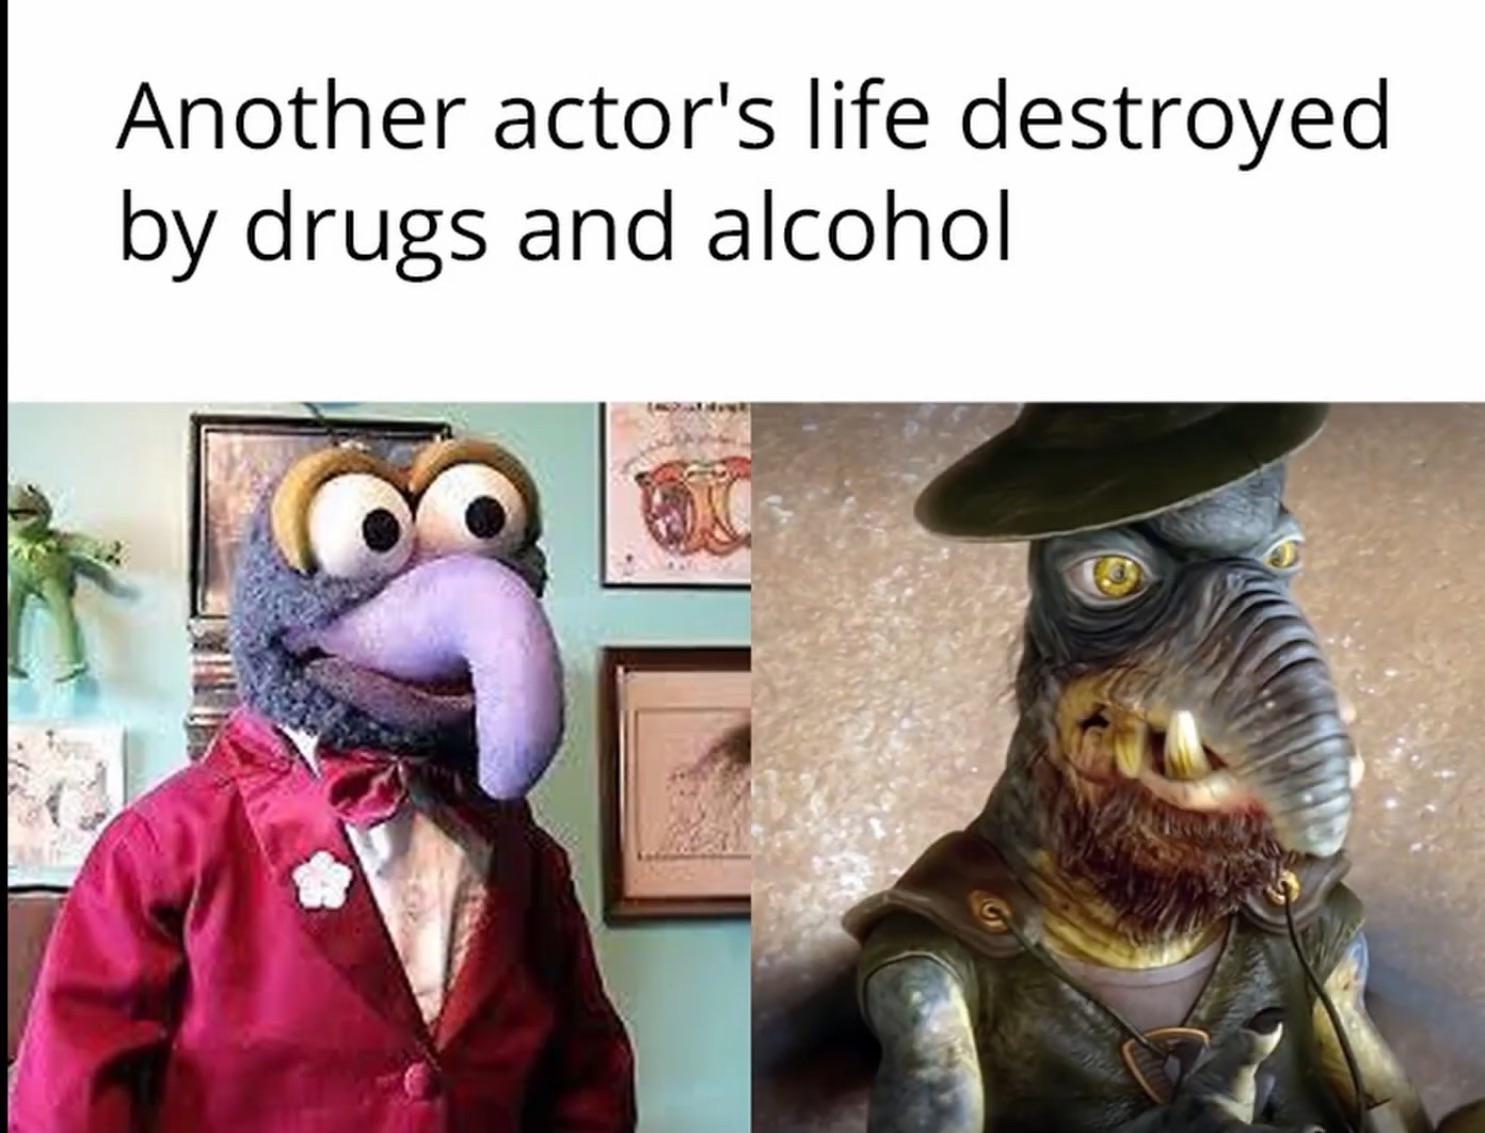 another actor ruined by drugs and alcohol - Another actor's life destroyed by drugs and alcohol